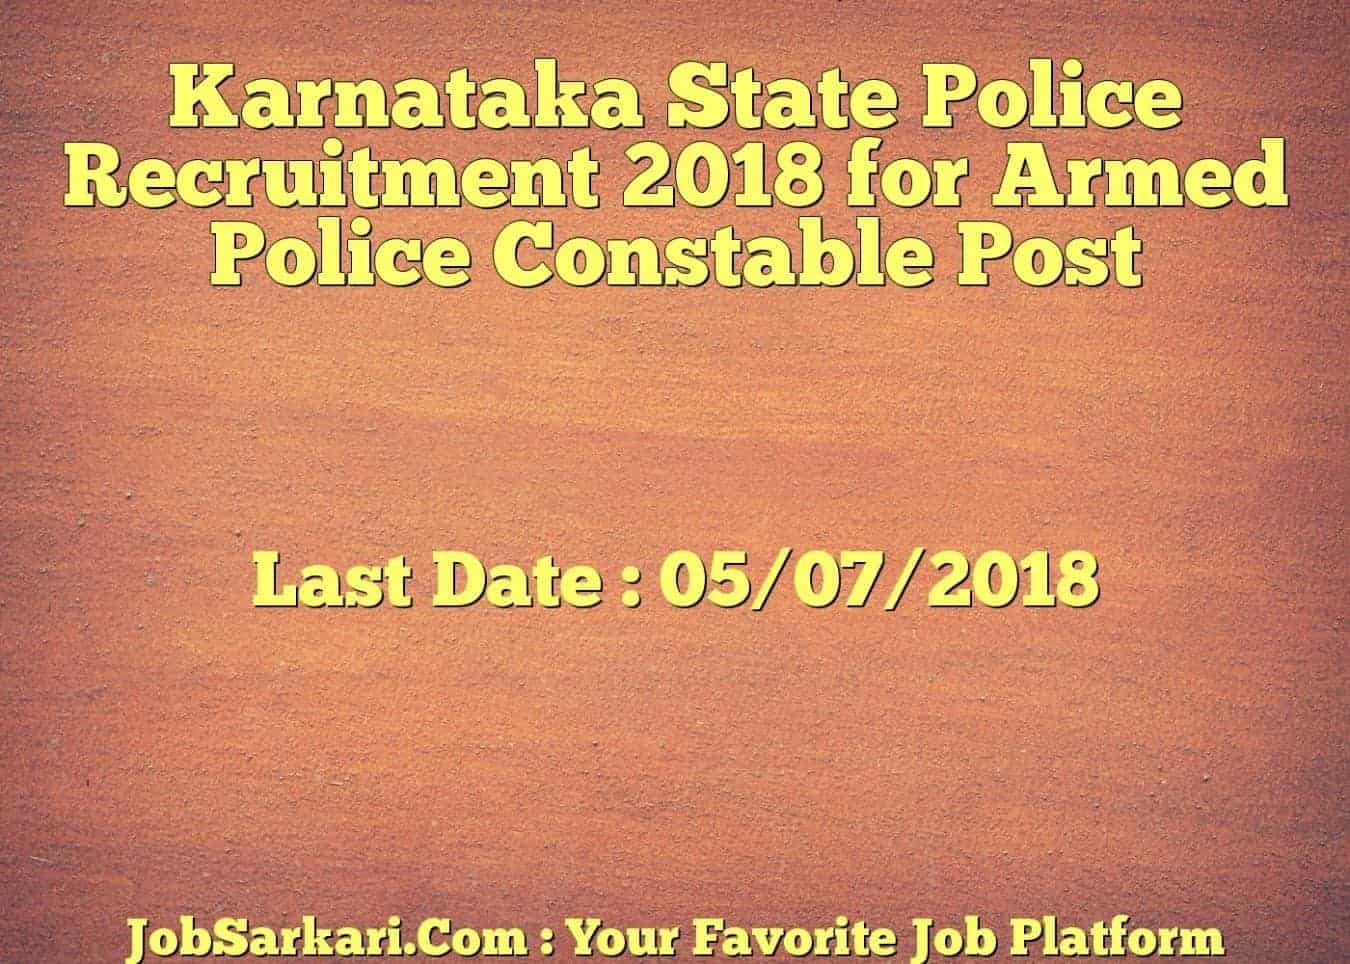 Karnataka State Police Recruitment 2018 for Armed Police Constable Post